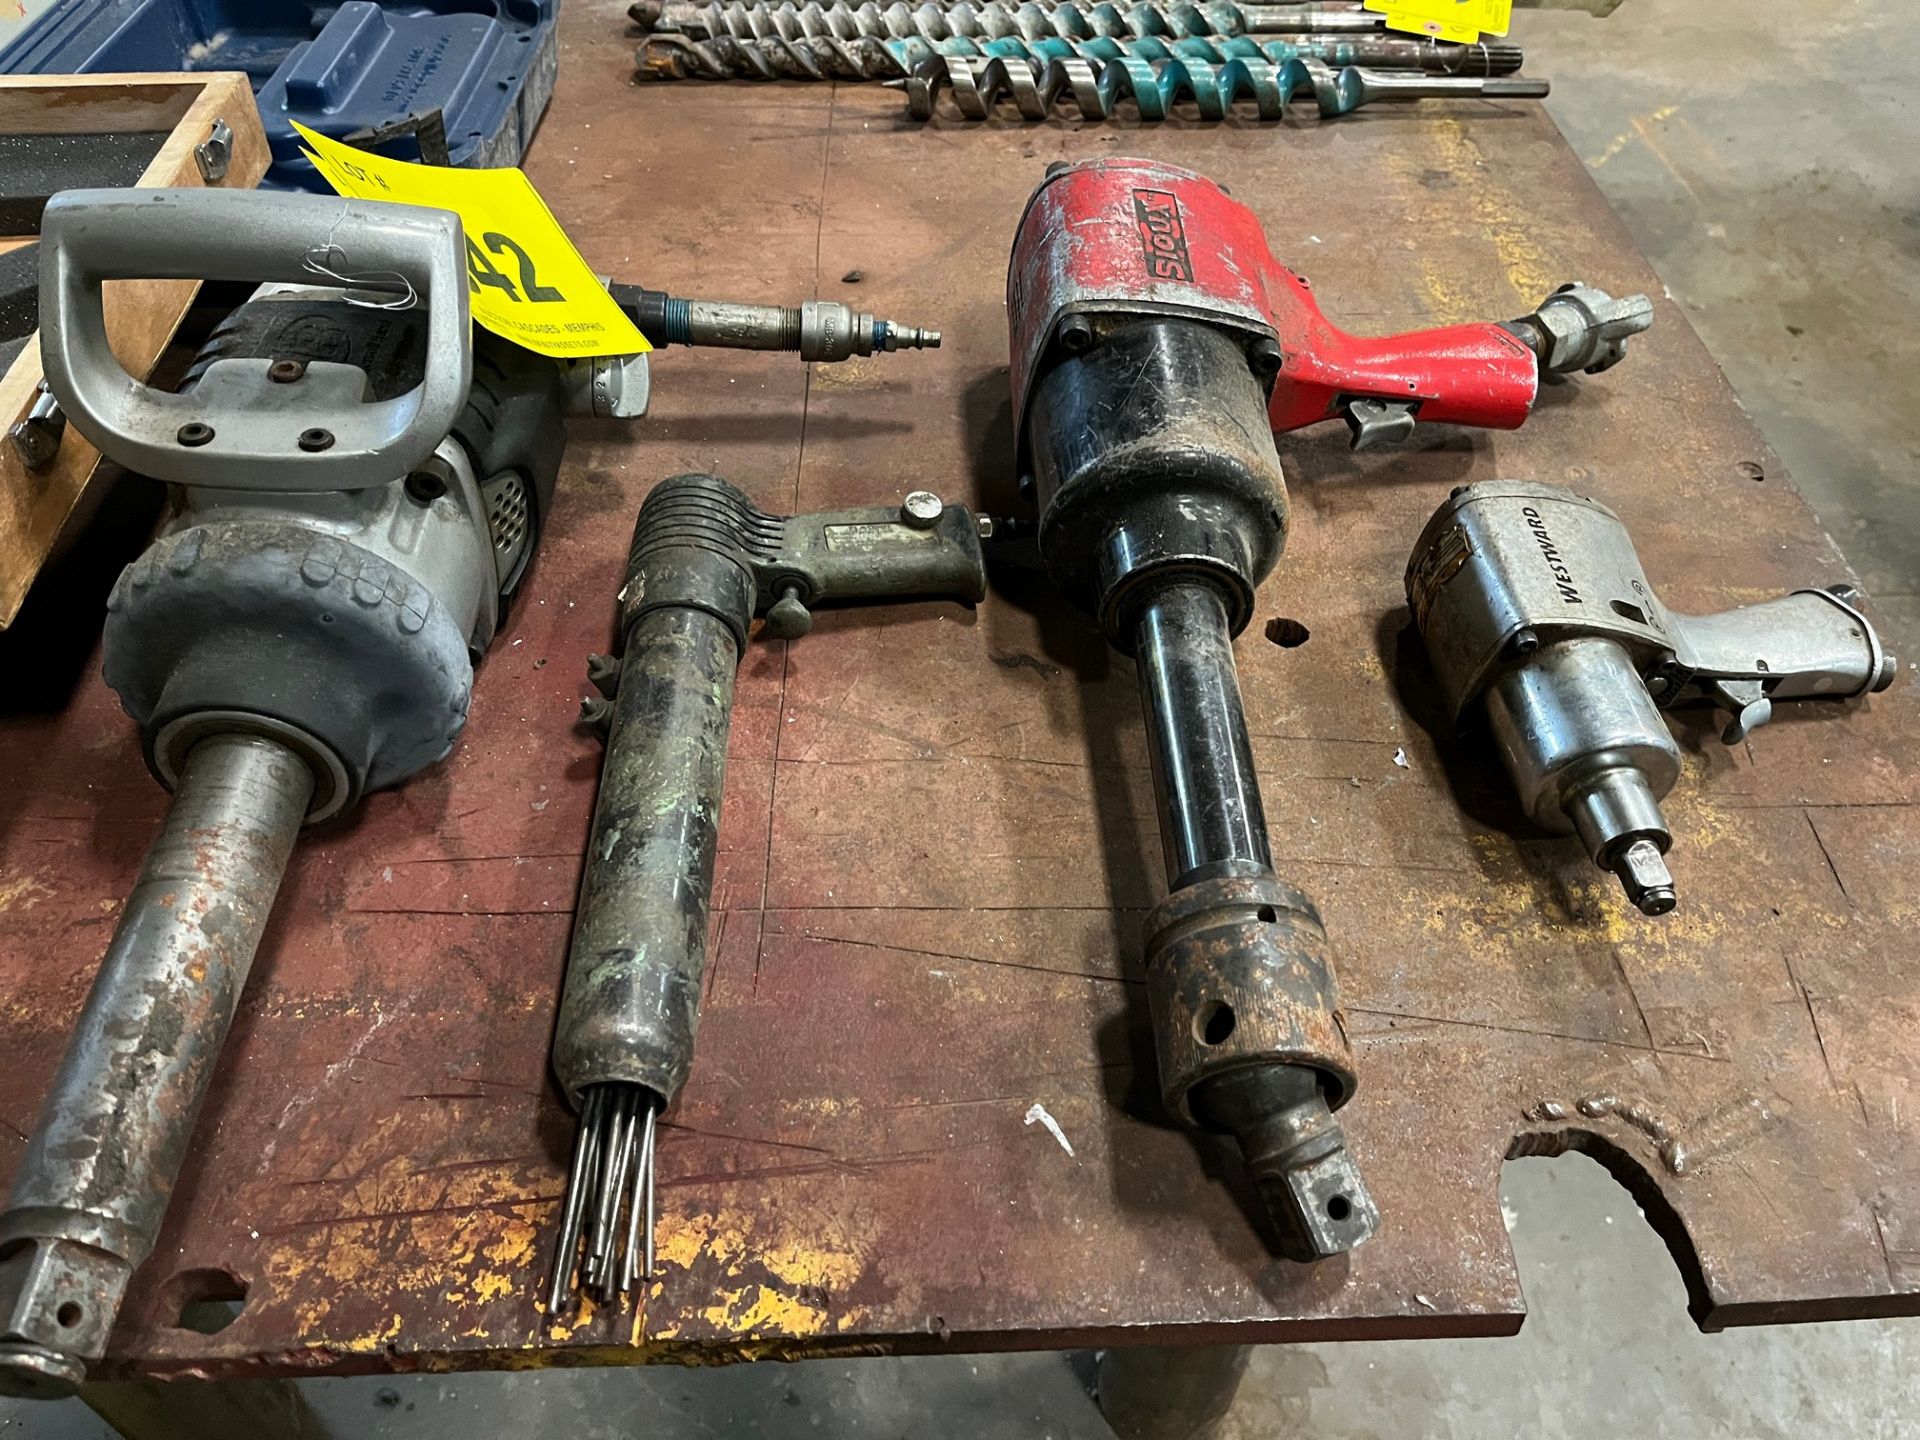 LOT OF (4) PNEUMATIC TOOLS (WESTWARD, SIOUX, INGERSOLL-RAND) (MAINTENANCE SHOP) - Image 2 of 2